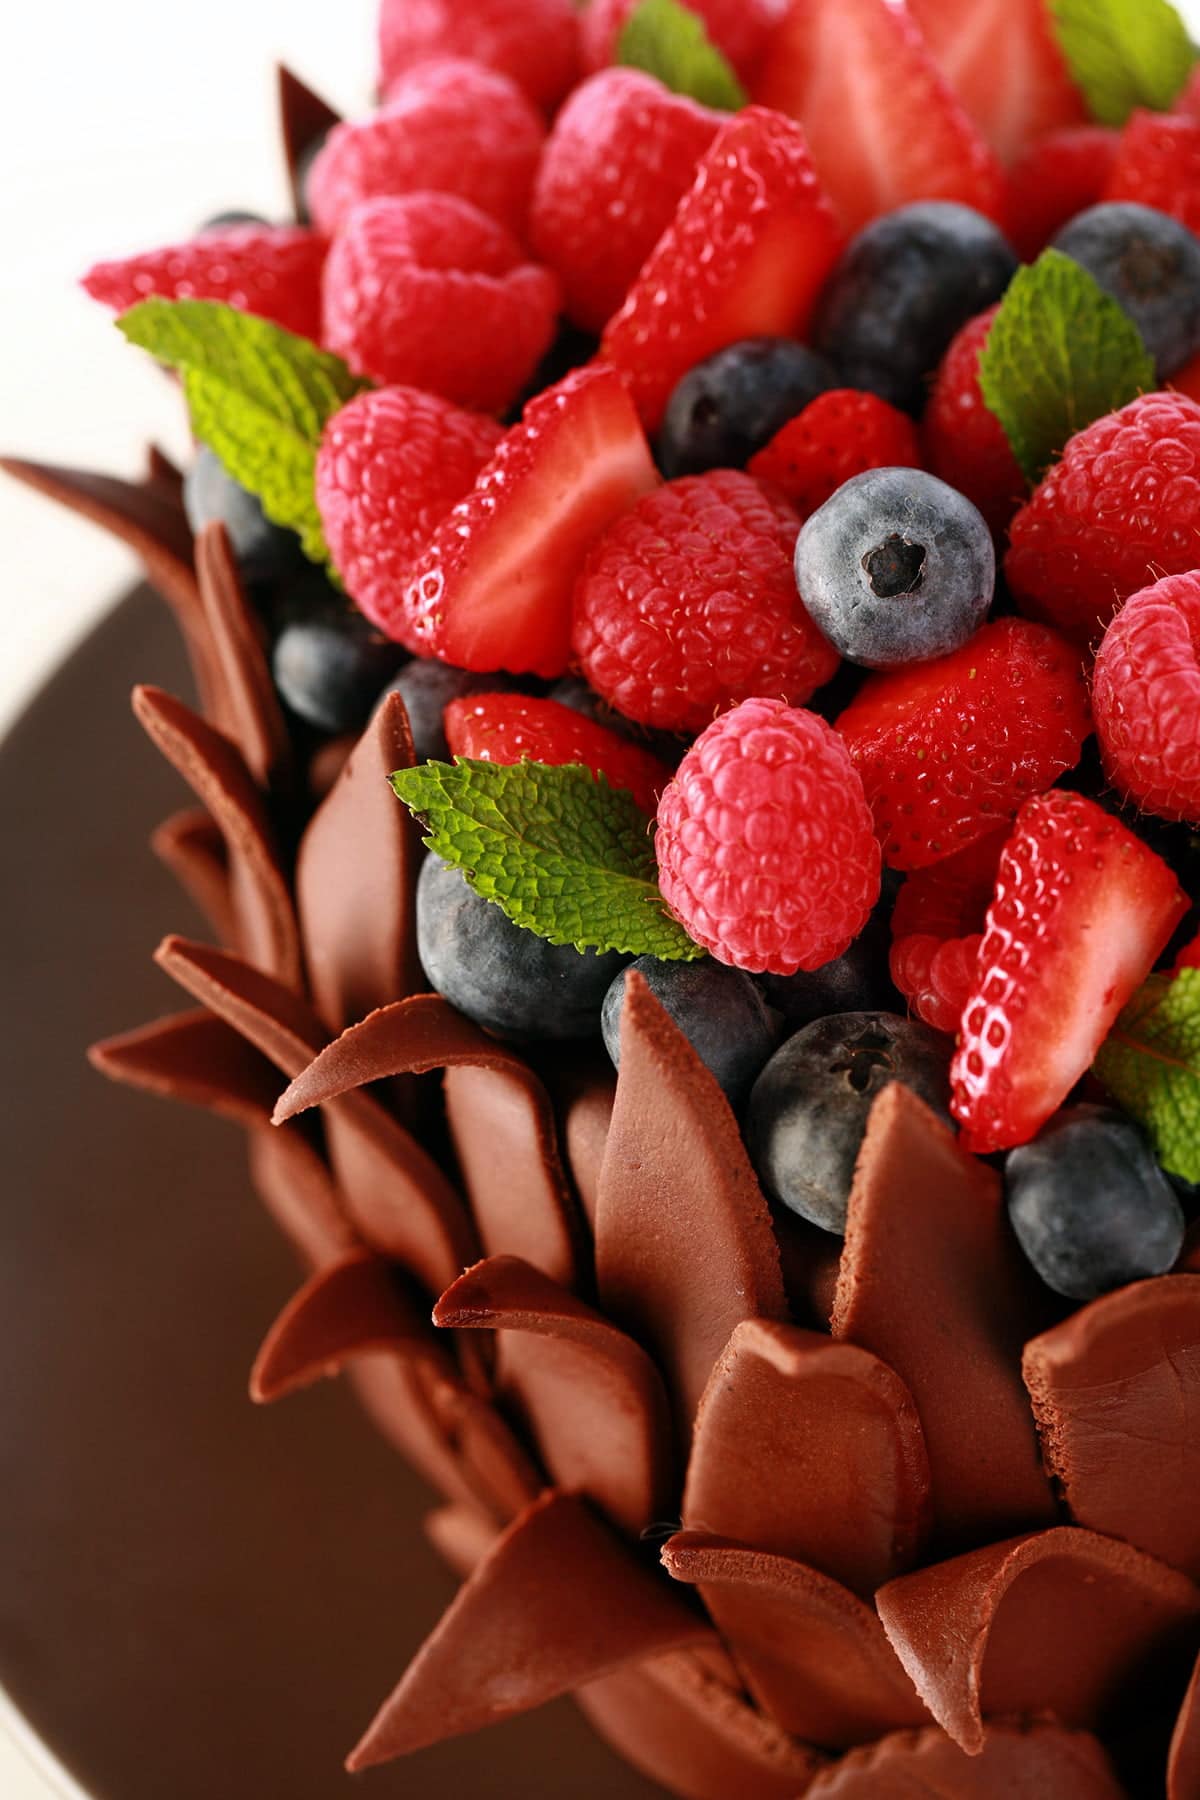 A heart shaped cake, covered in chocolate fondant leaves. The top of the cake is covered with a pile of fresh berries and mint leaves.